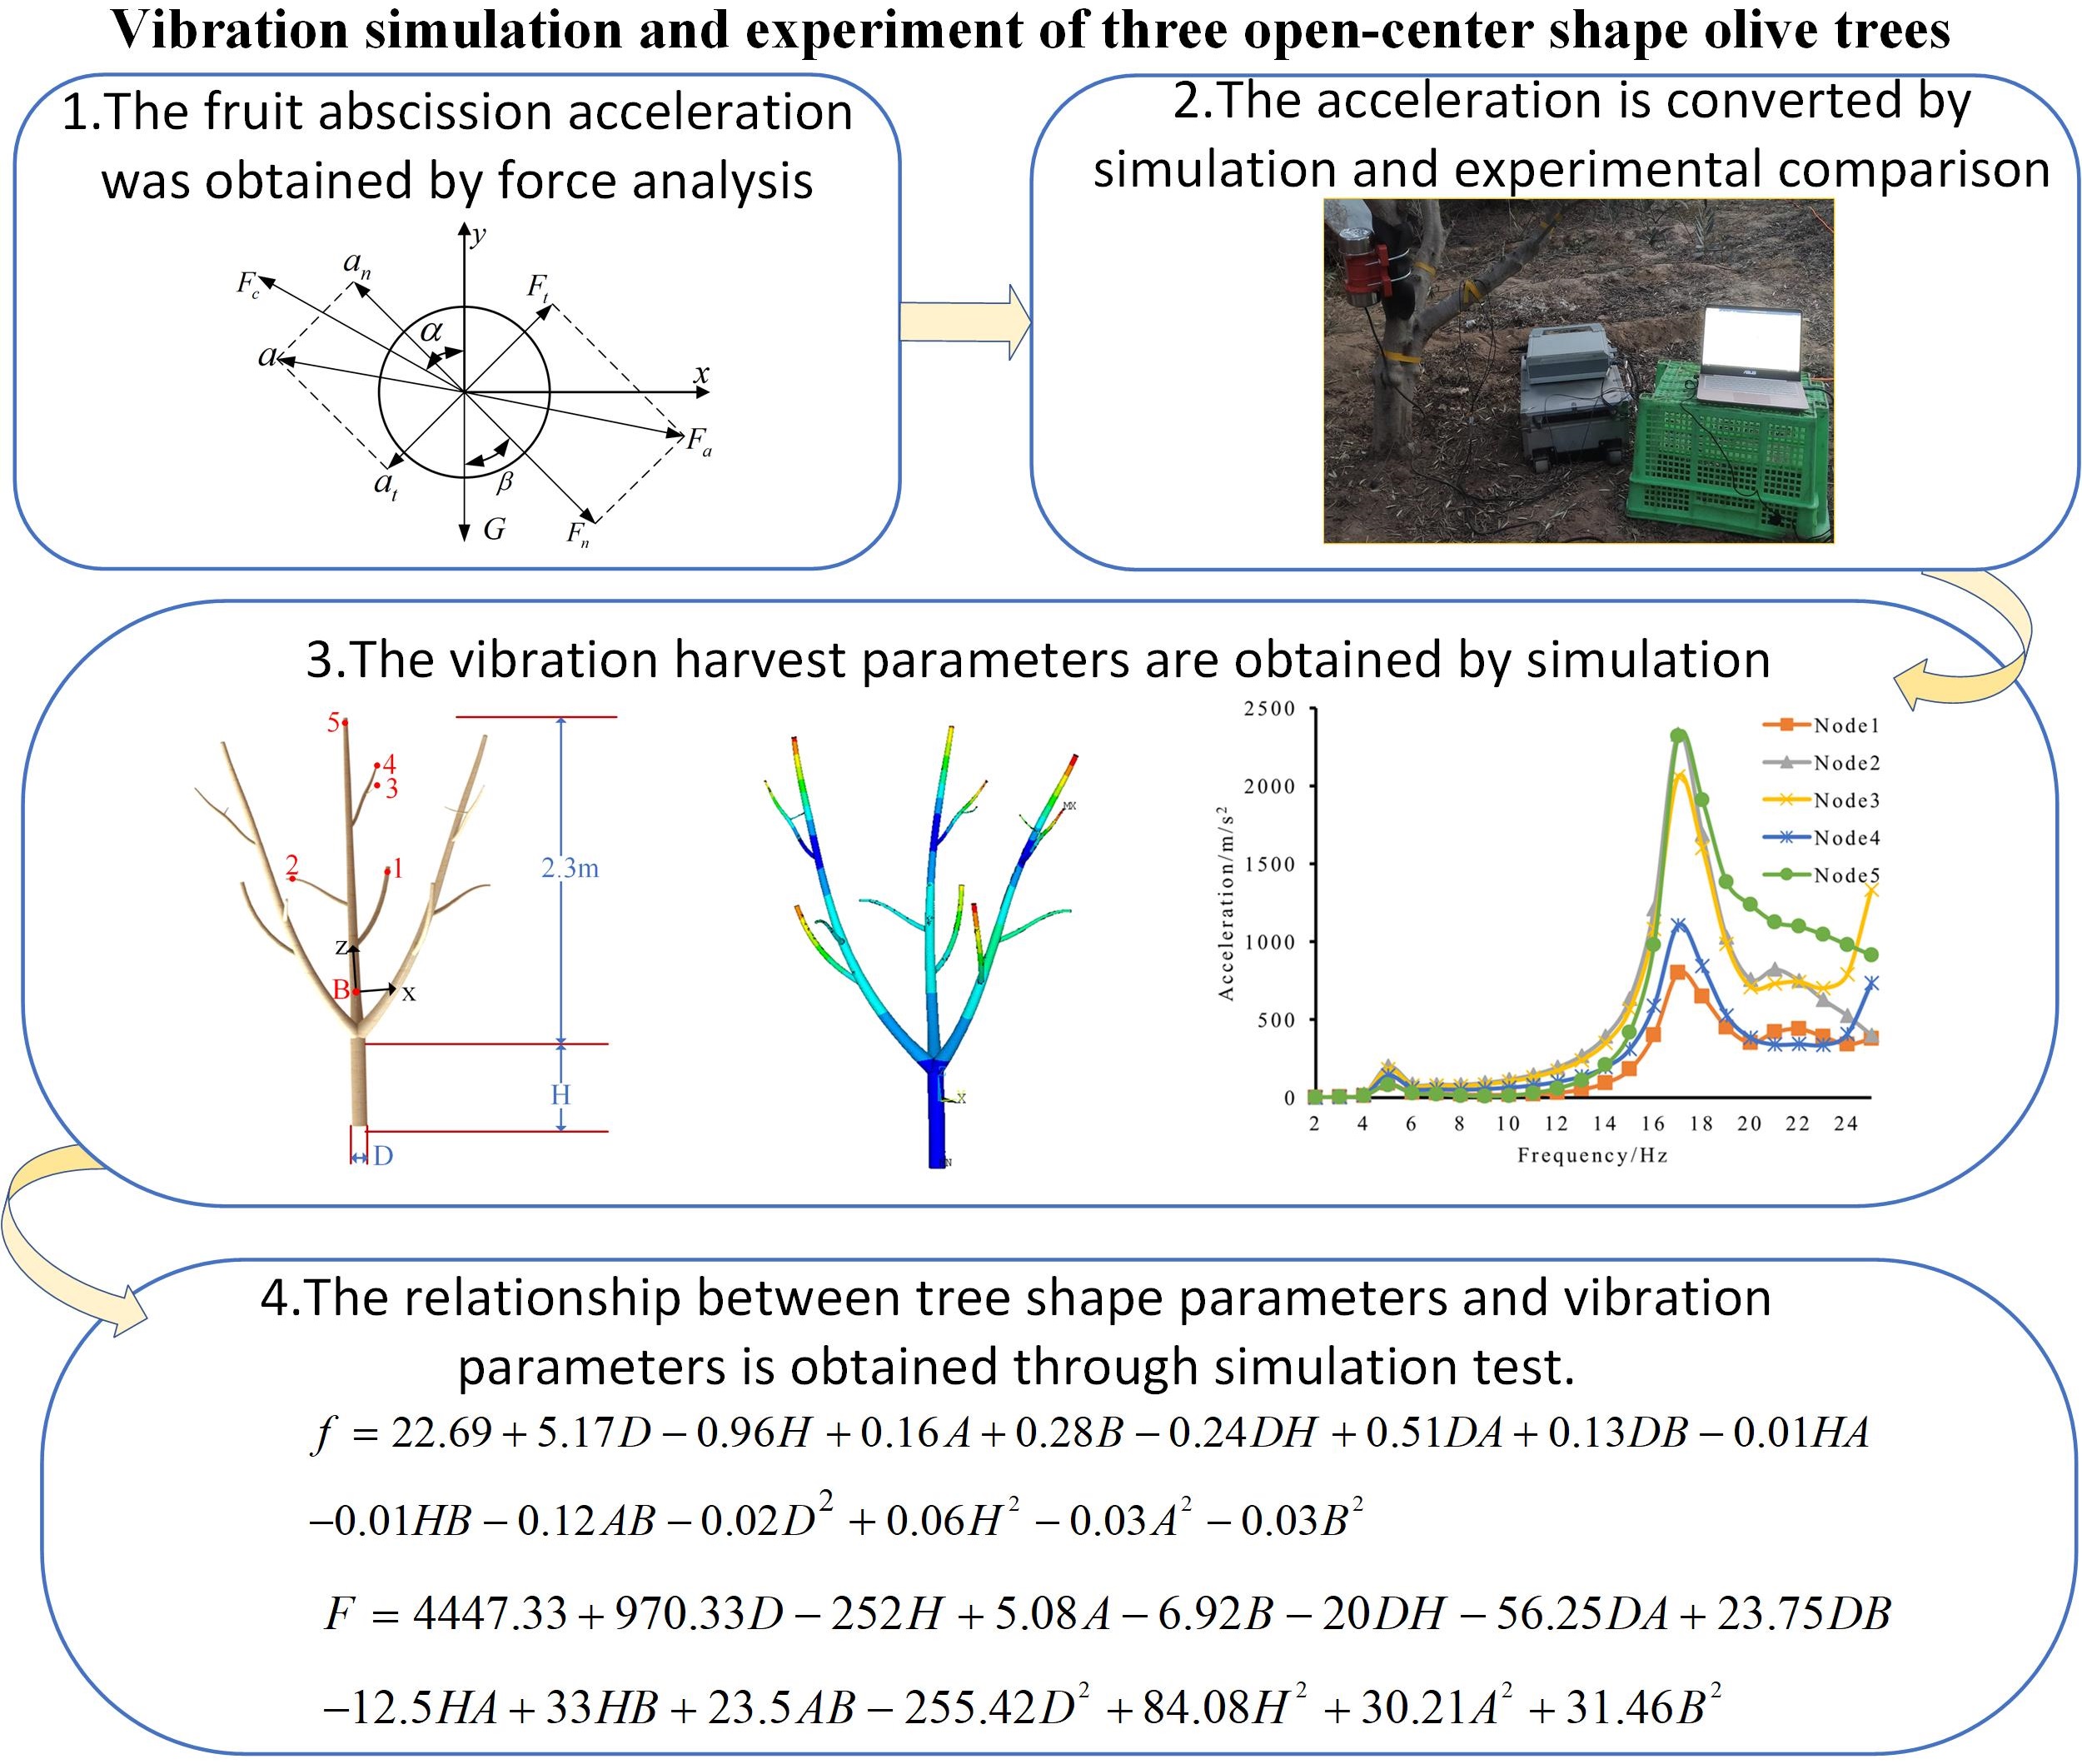 Vibration simulation and experiment of three open-center shape olive trees